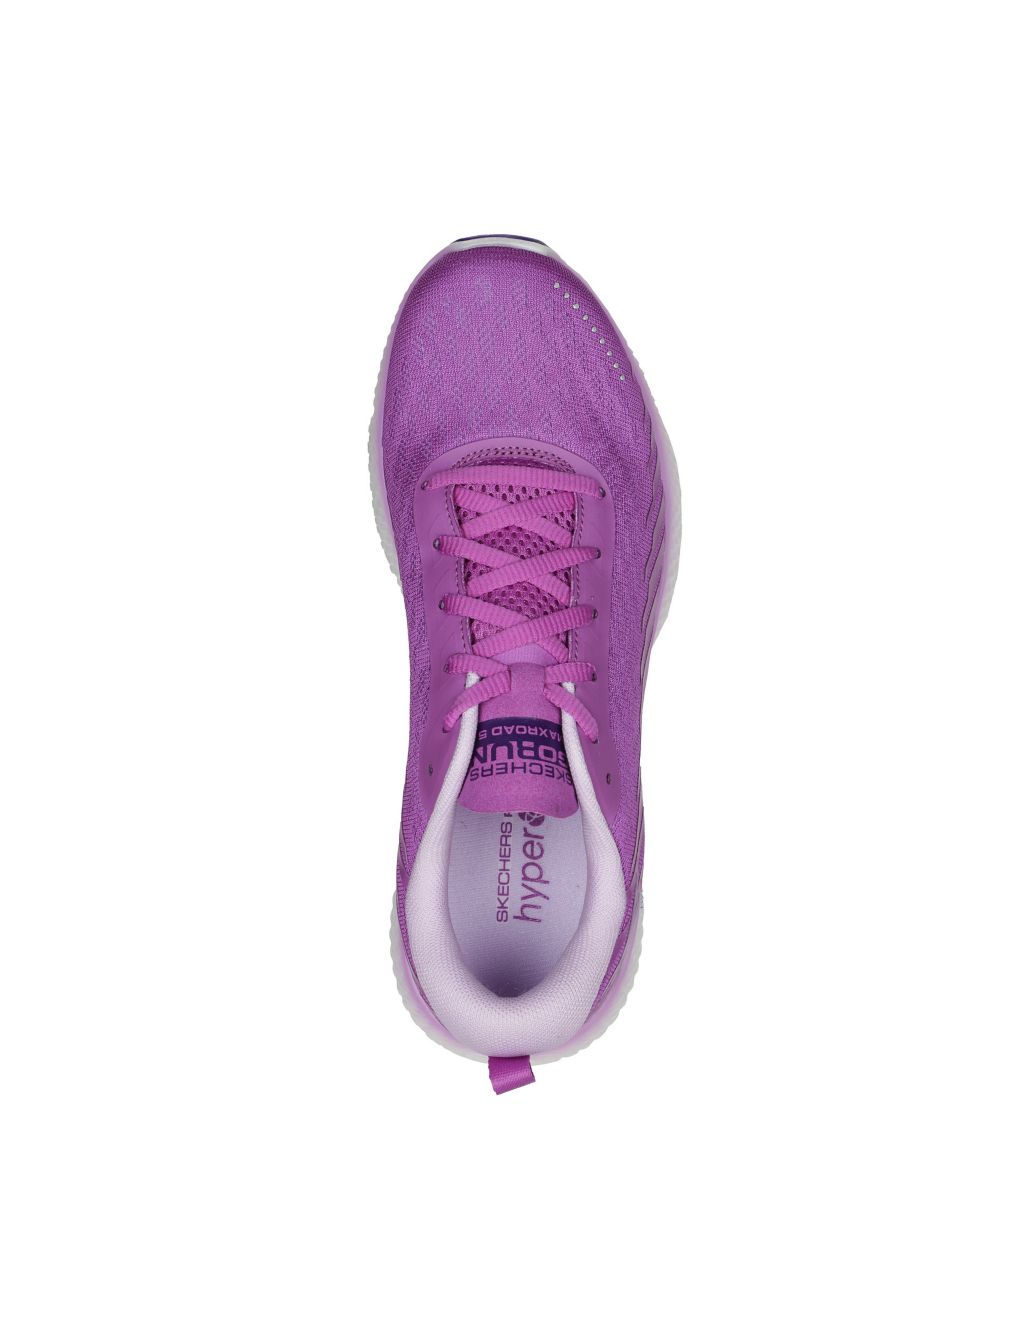 GOrun MaxRoad 5 Knitted Lace Up Trainers image 3